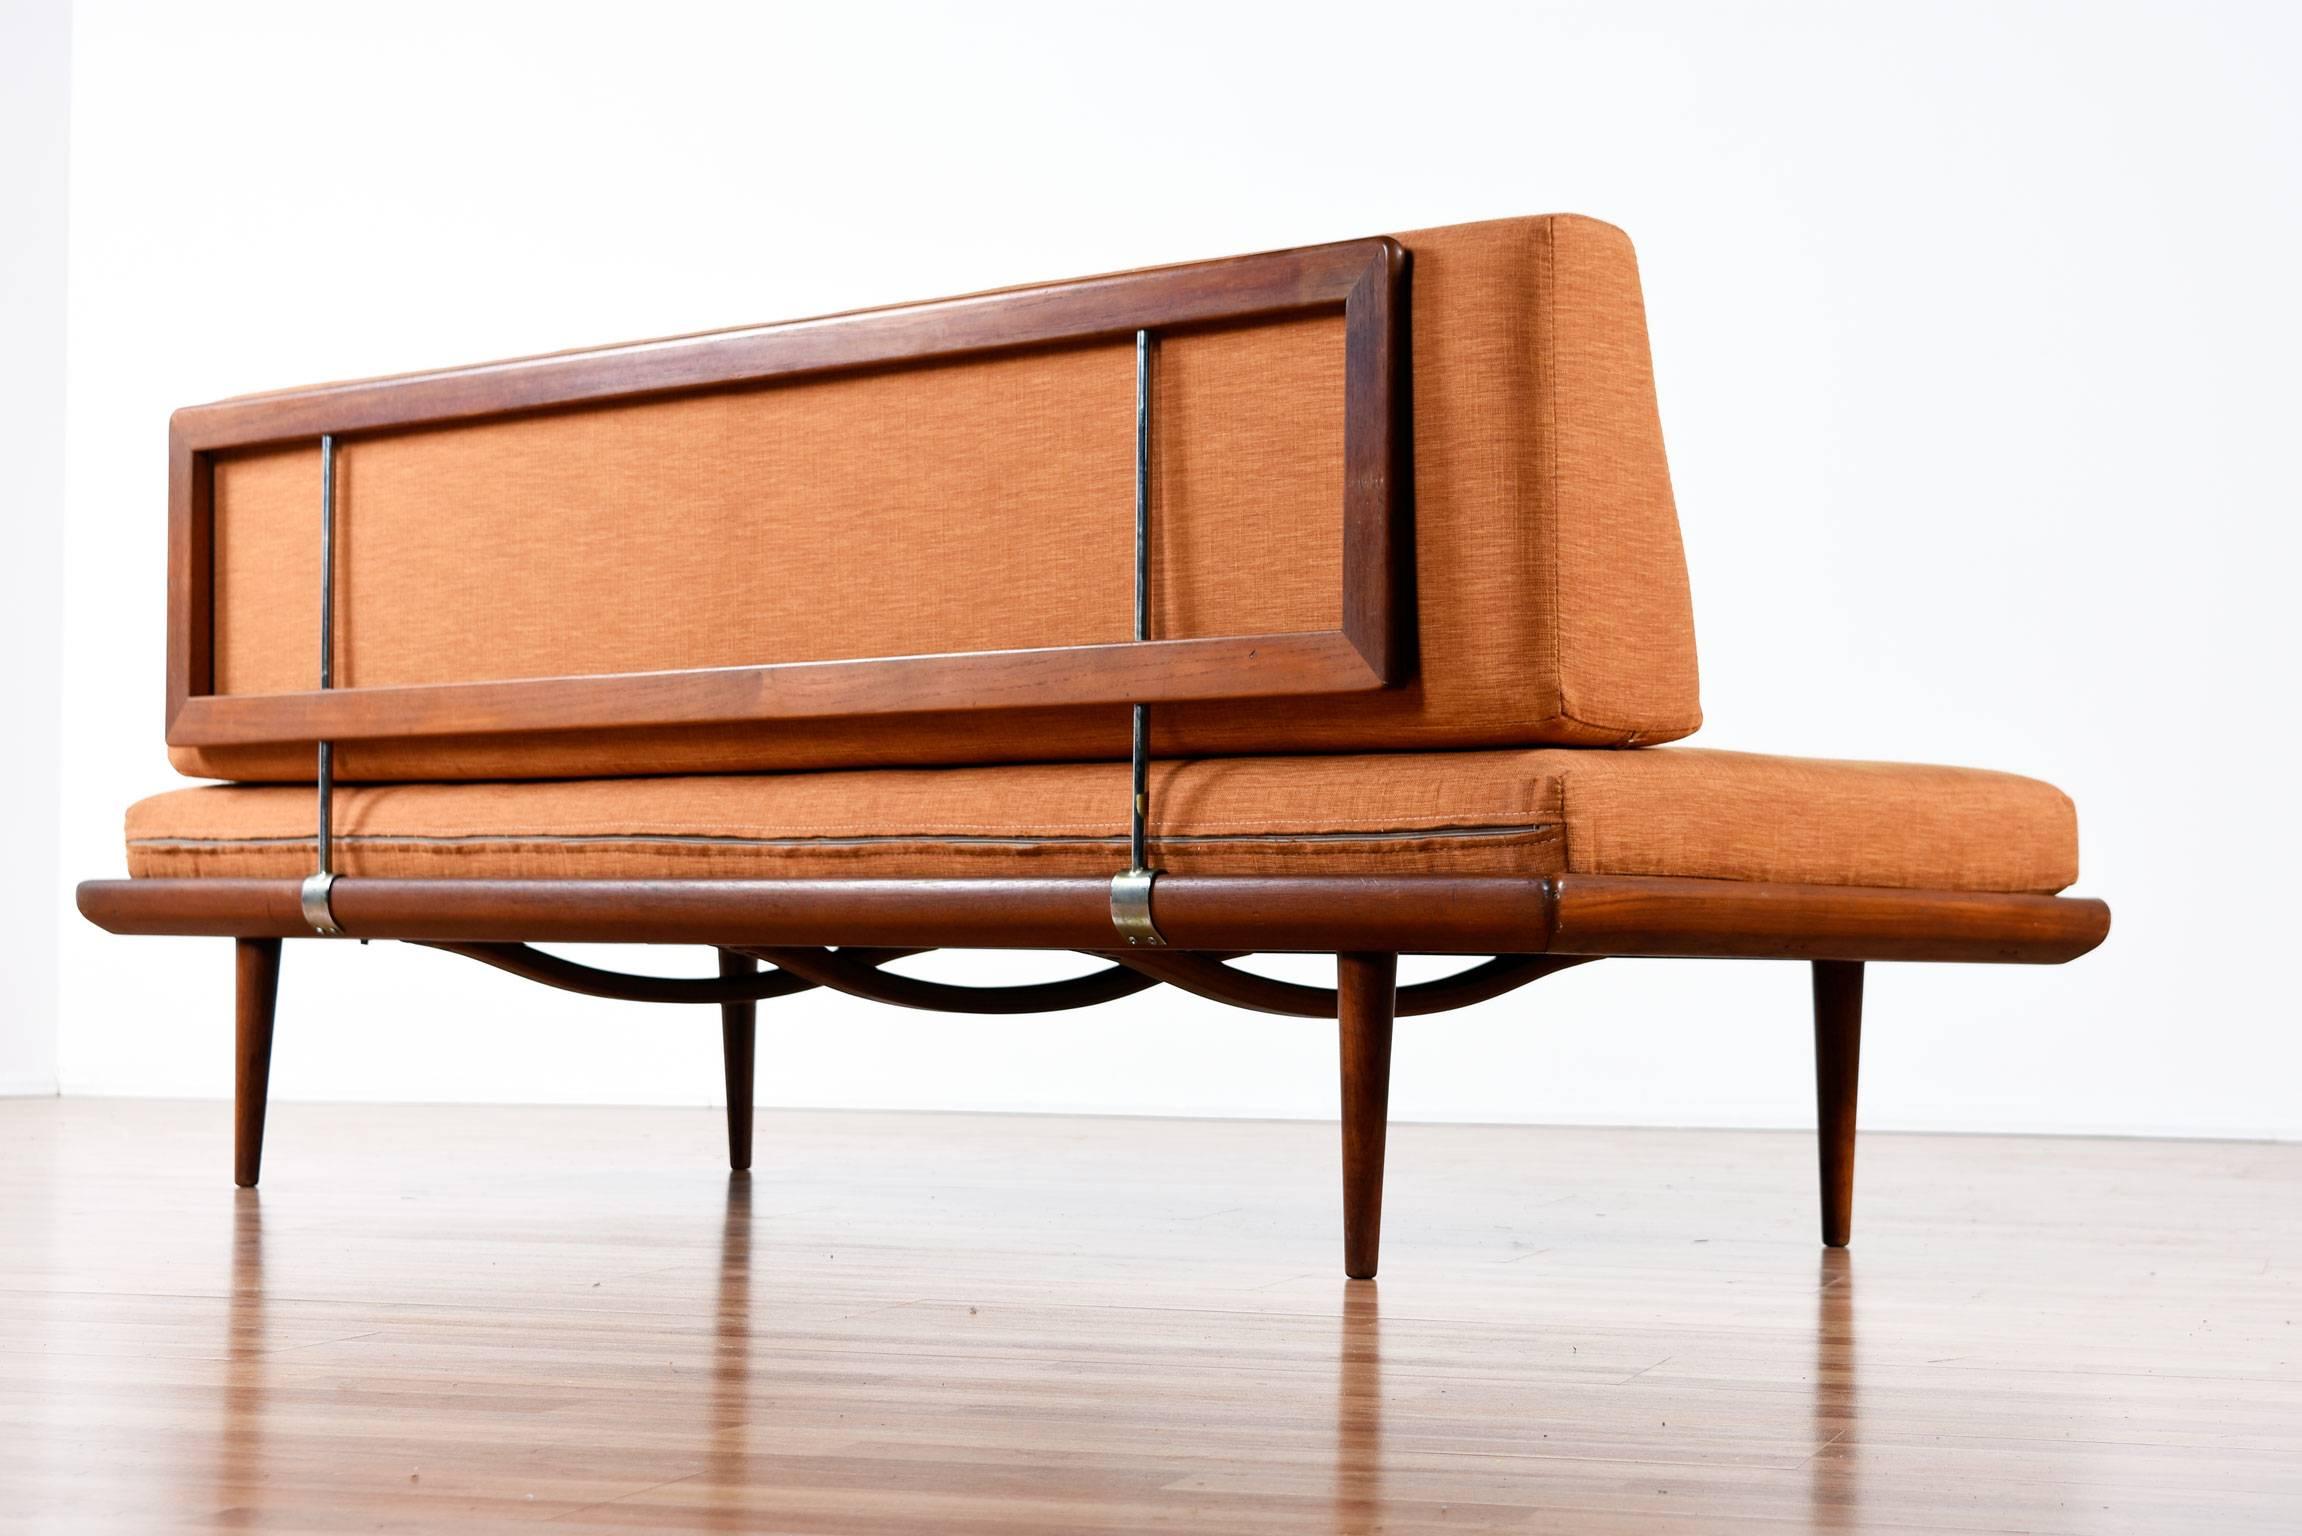 Beautifully restored Mid-Century Modern daybed sofa. The famed 